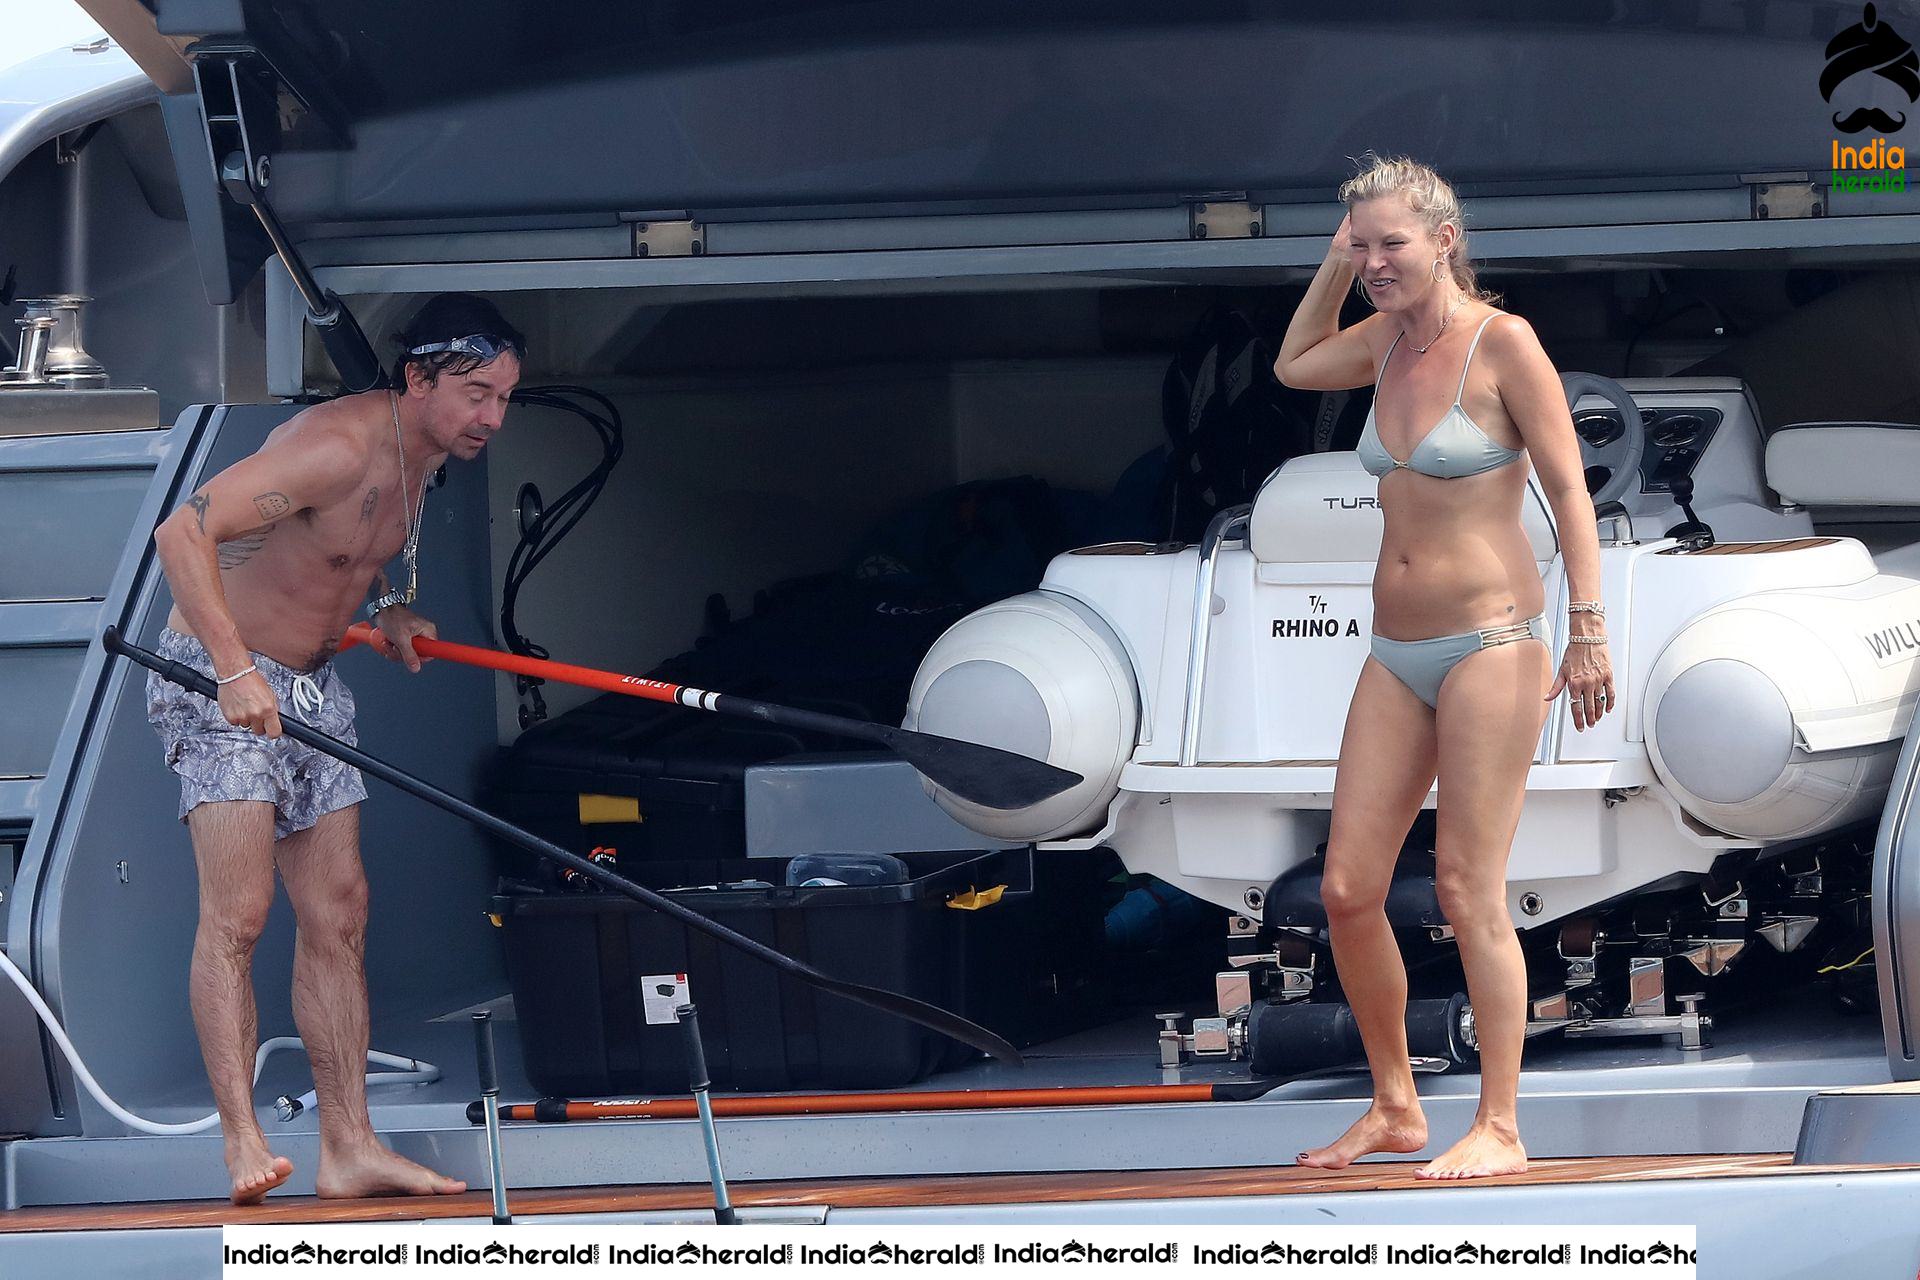 Kate Moss was caught in Bikini during her vacation in Europe Set 1